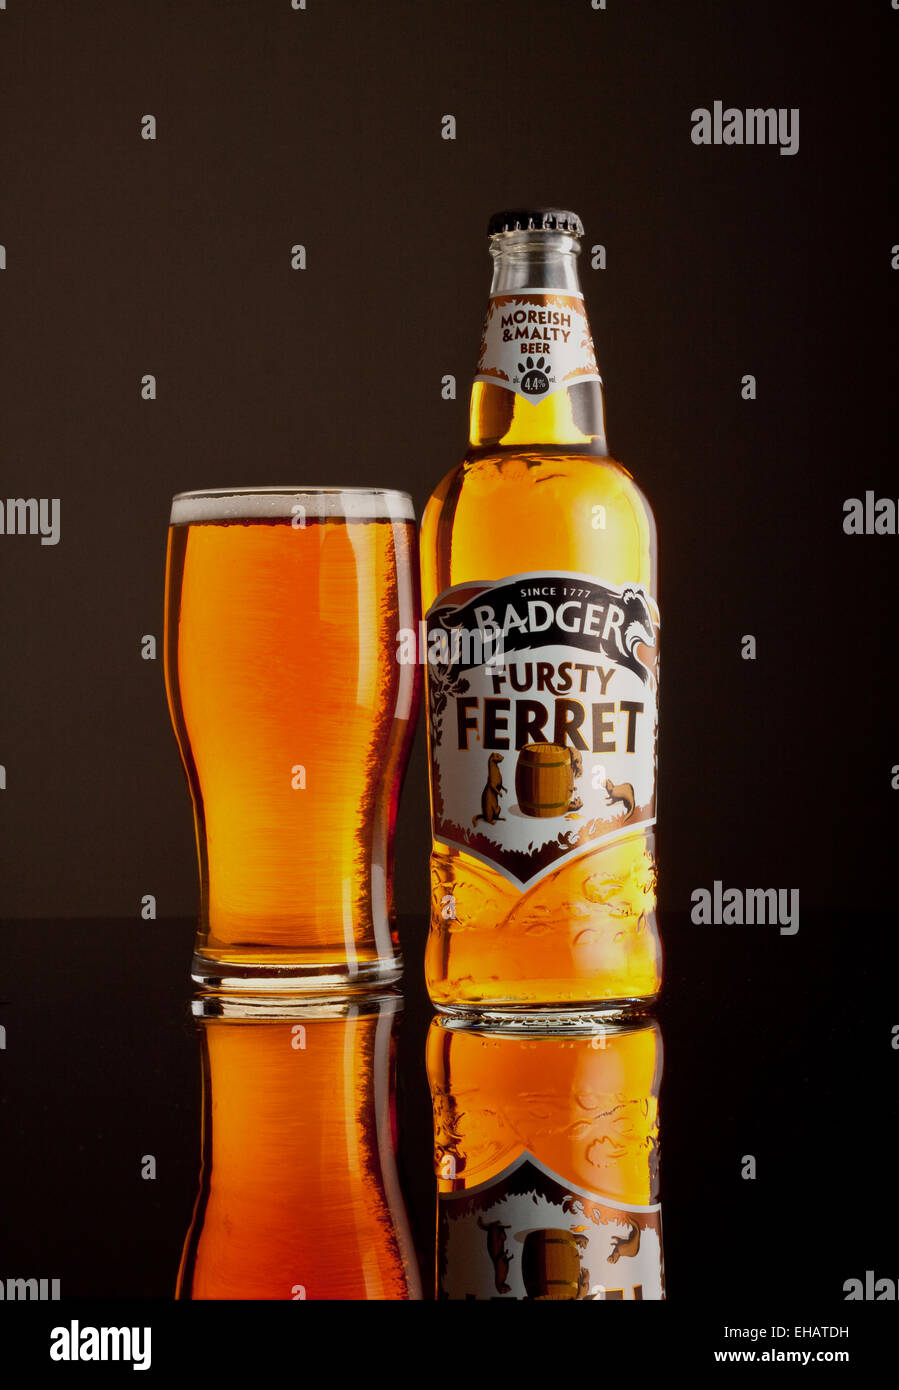 Bottle of Ale with a poured pint glass Stock Photo